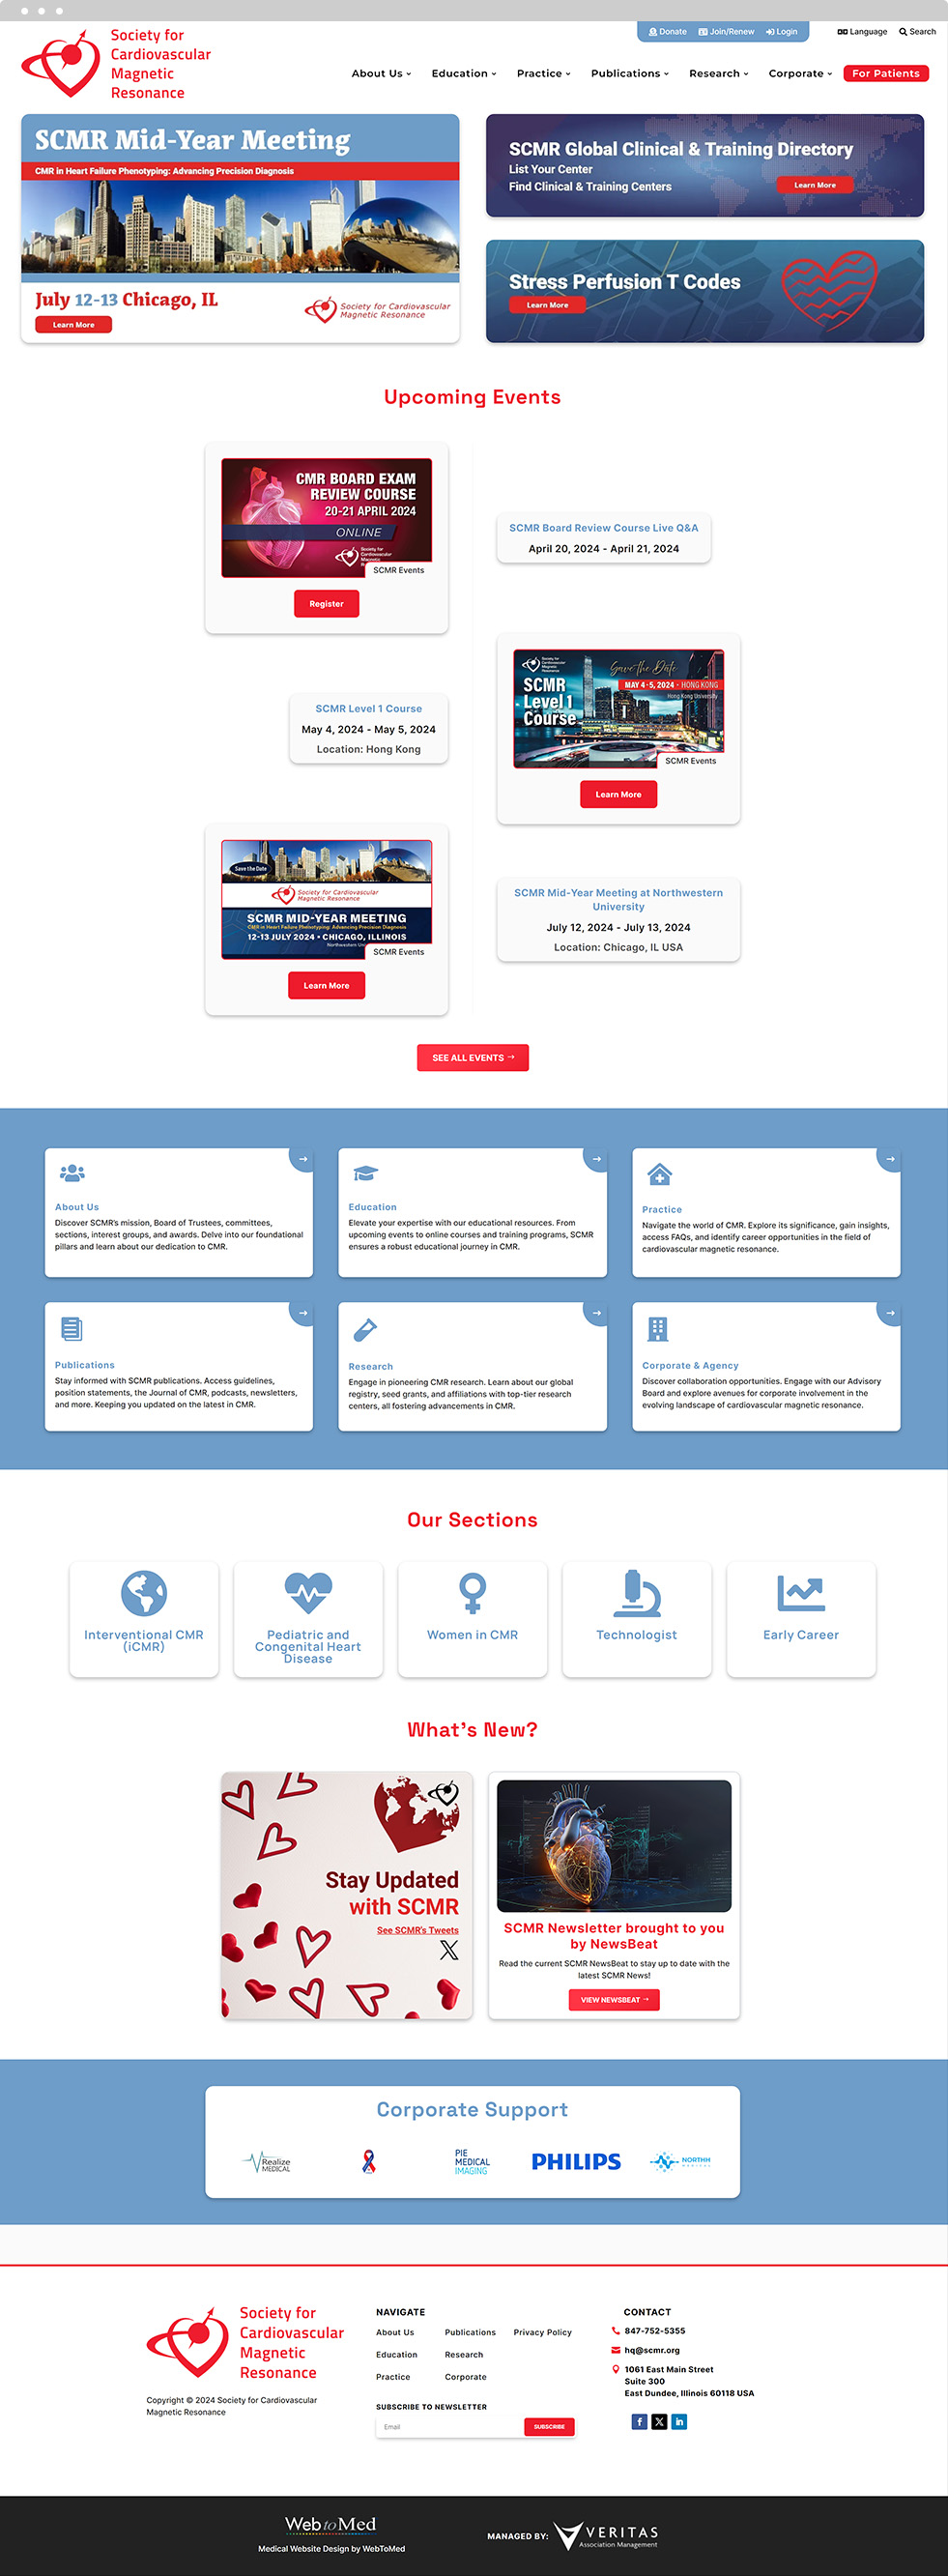 Medical Associations Website Design - Society for Cardiovascular Magnetic Resonance - Homepage